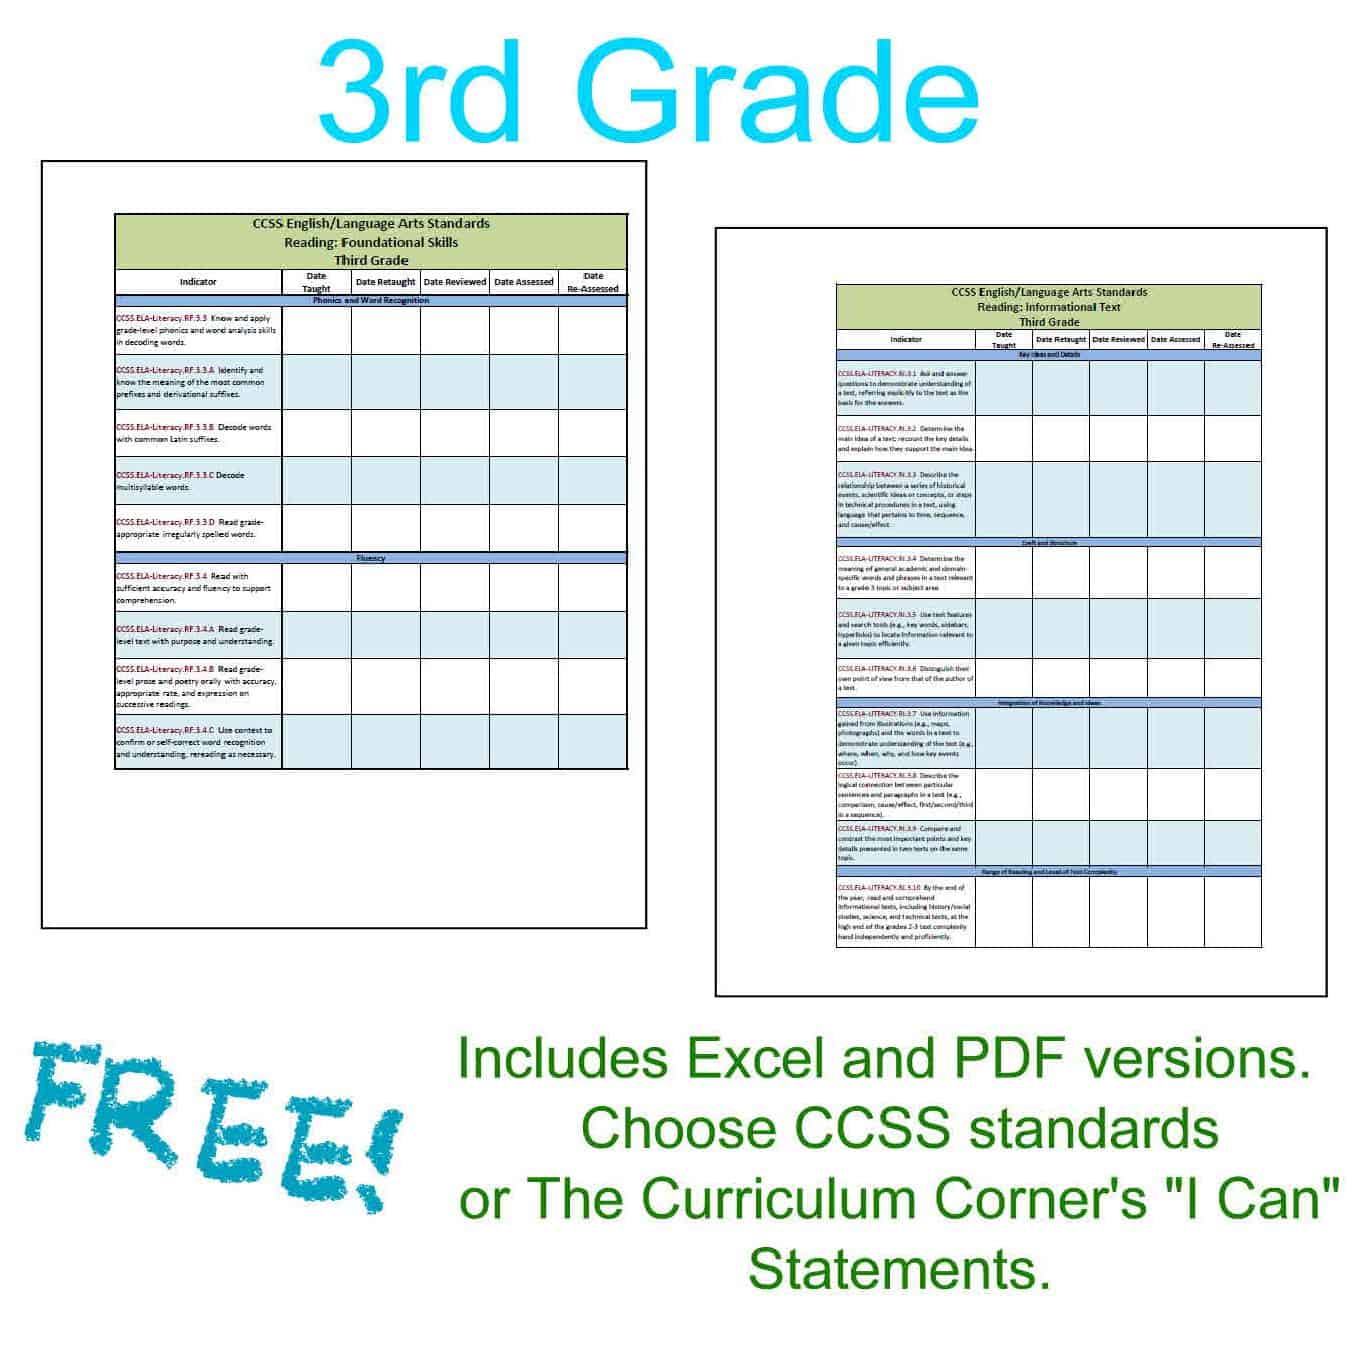 Updated 3rd Grade CCSS "I Can" Checklists - The Curriculum Corner 123